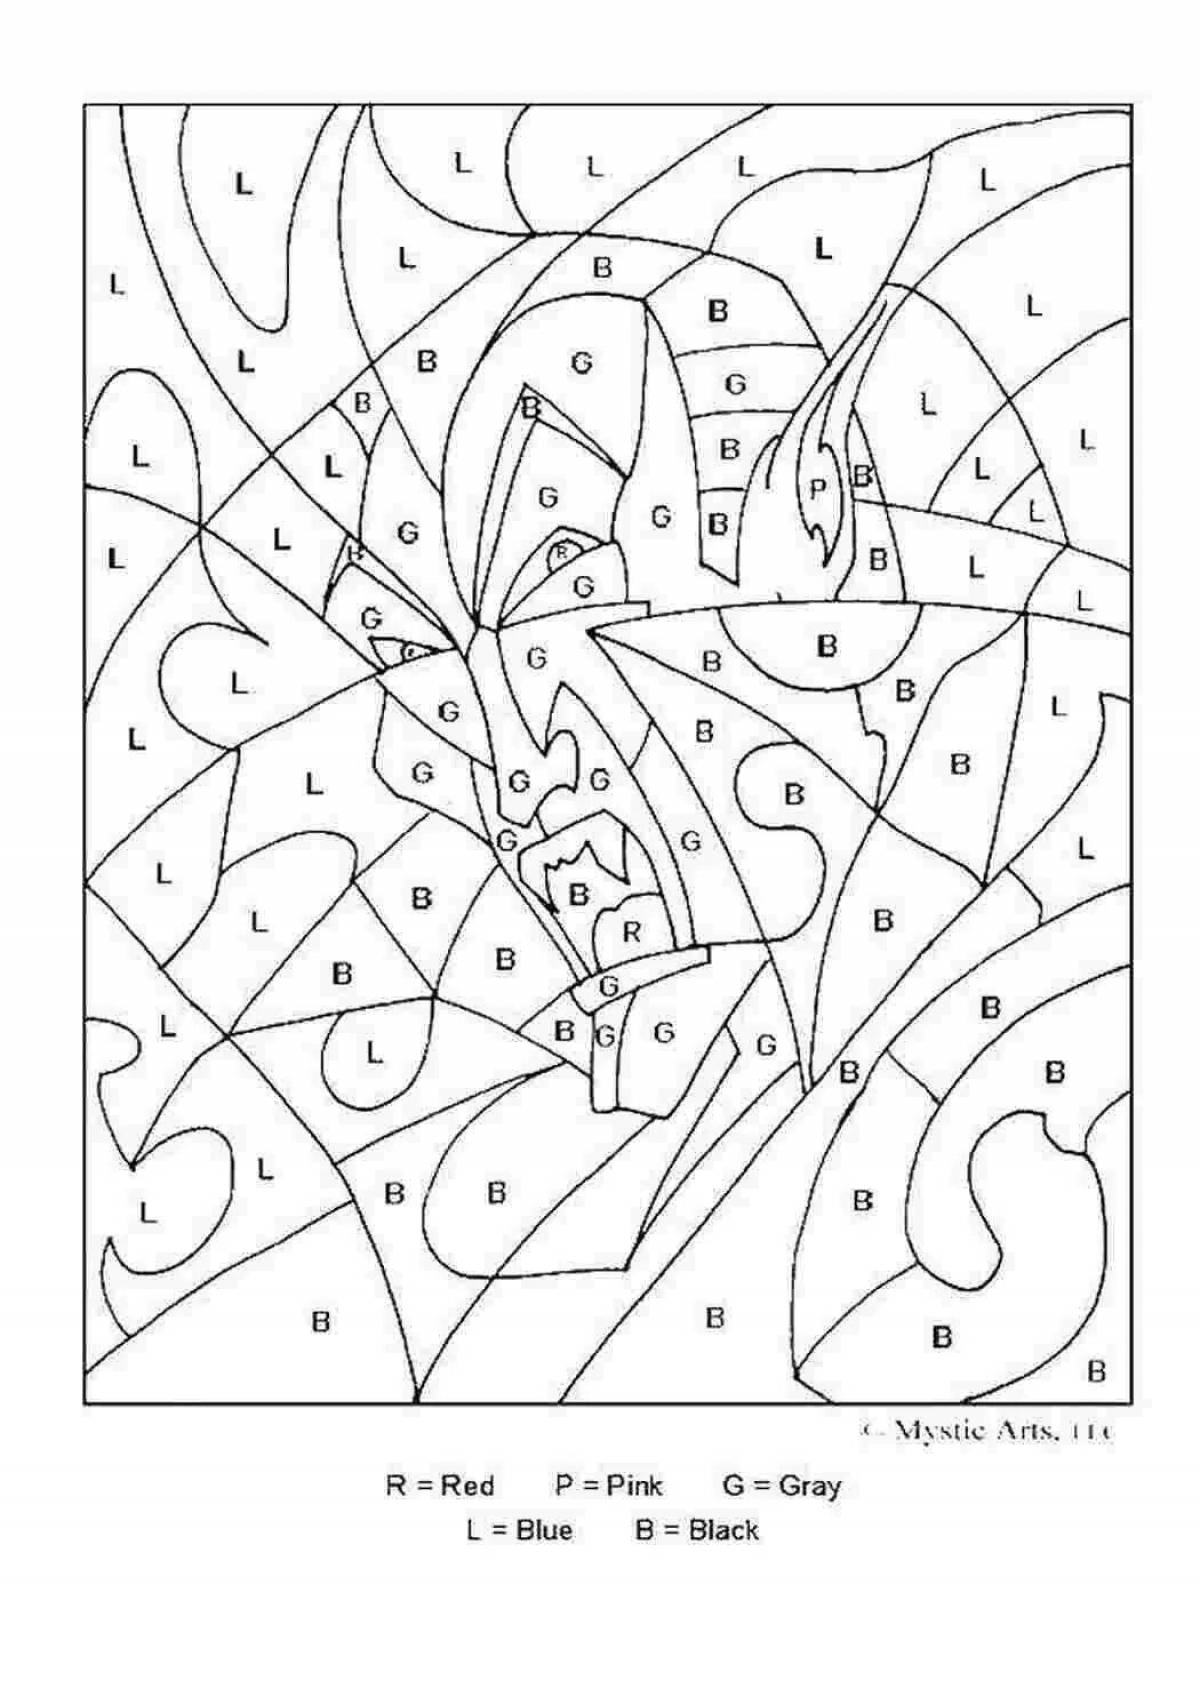 Charming english by numbers coloring book